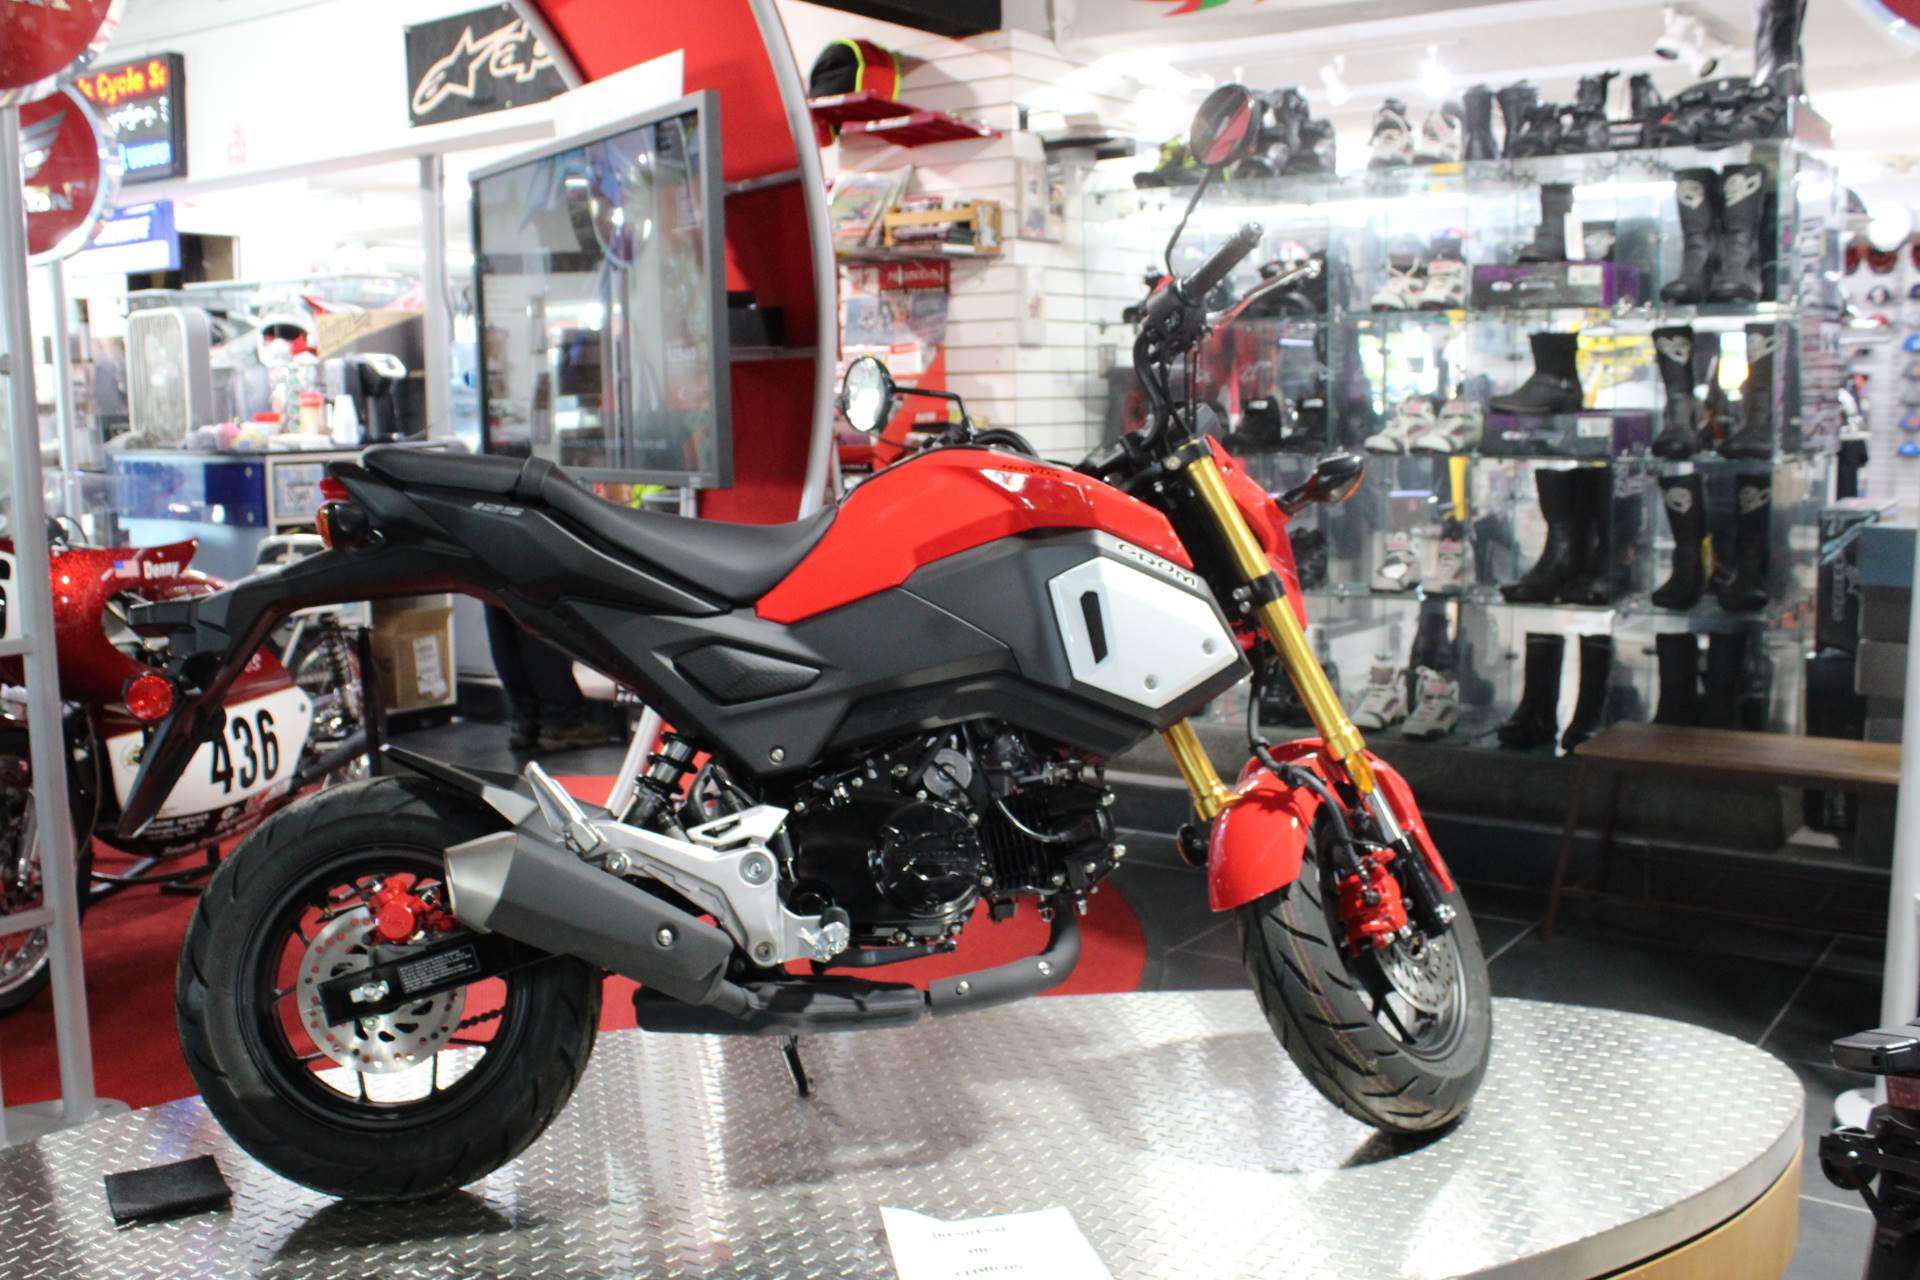 New Honda Grom Abs Motorcycles In Sarasota Fl Nhm1707 Cherry Red